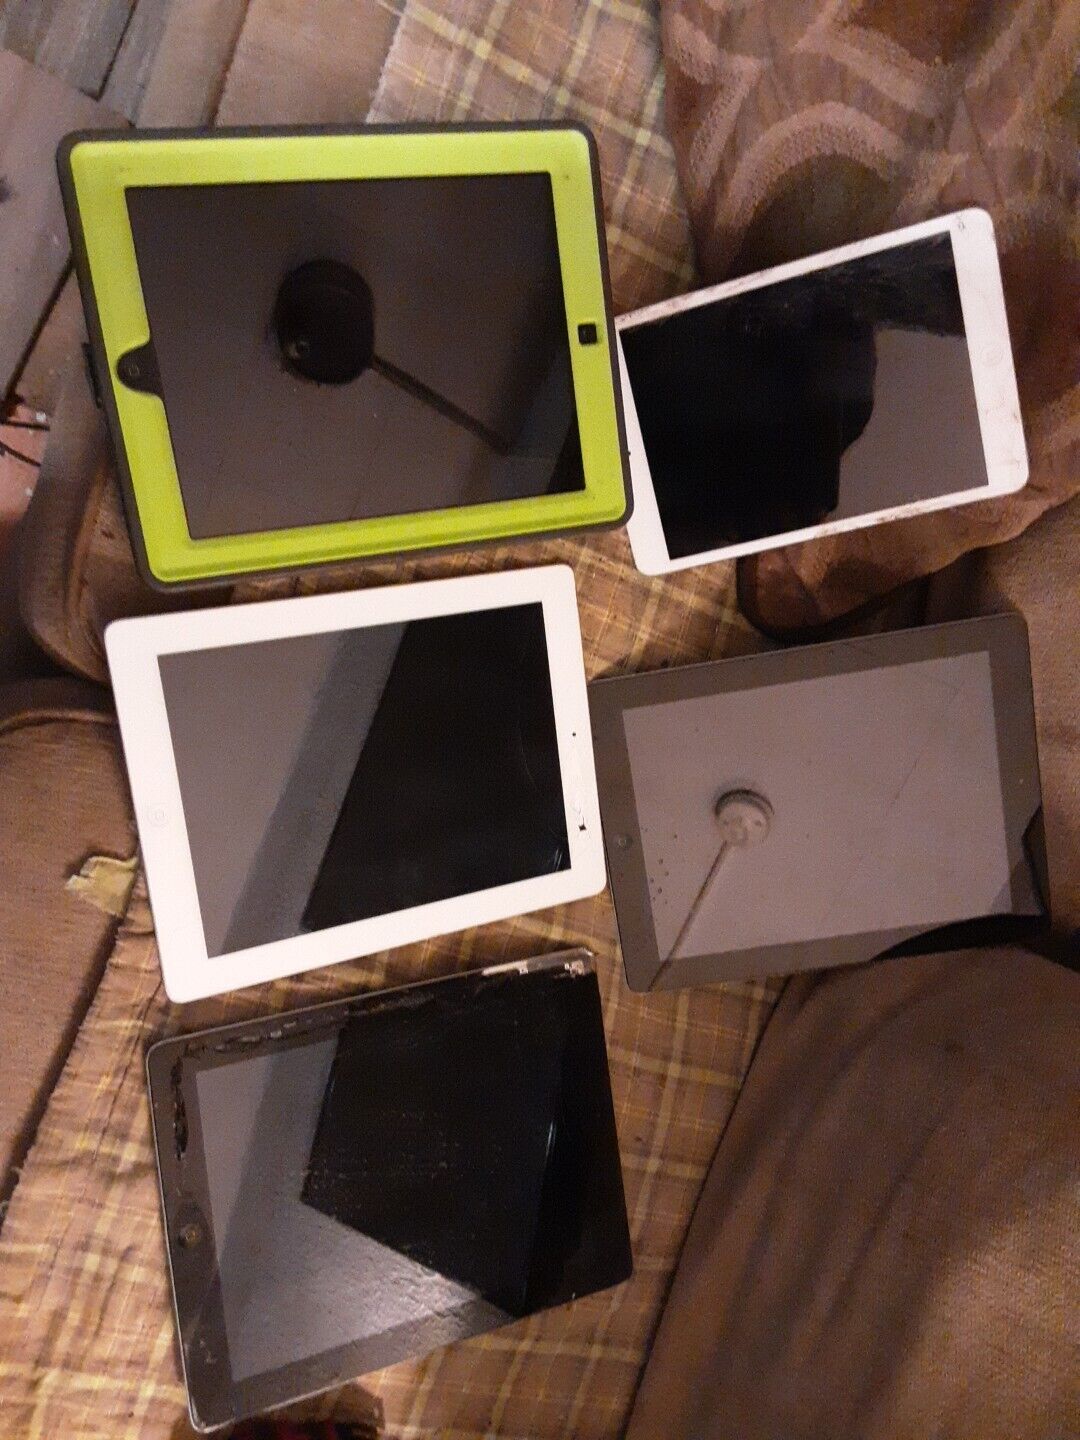 Lot of 5 ipads for parts